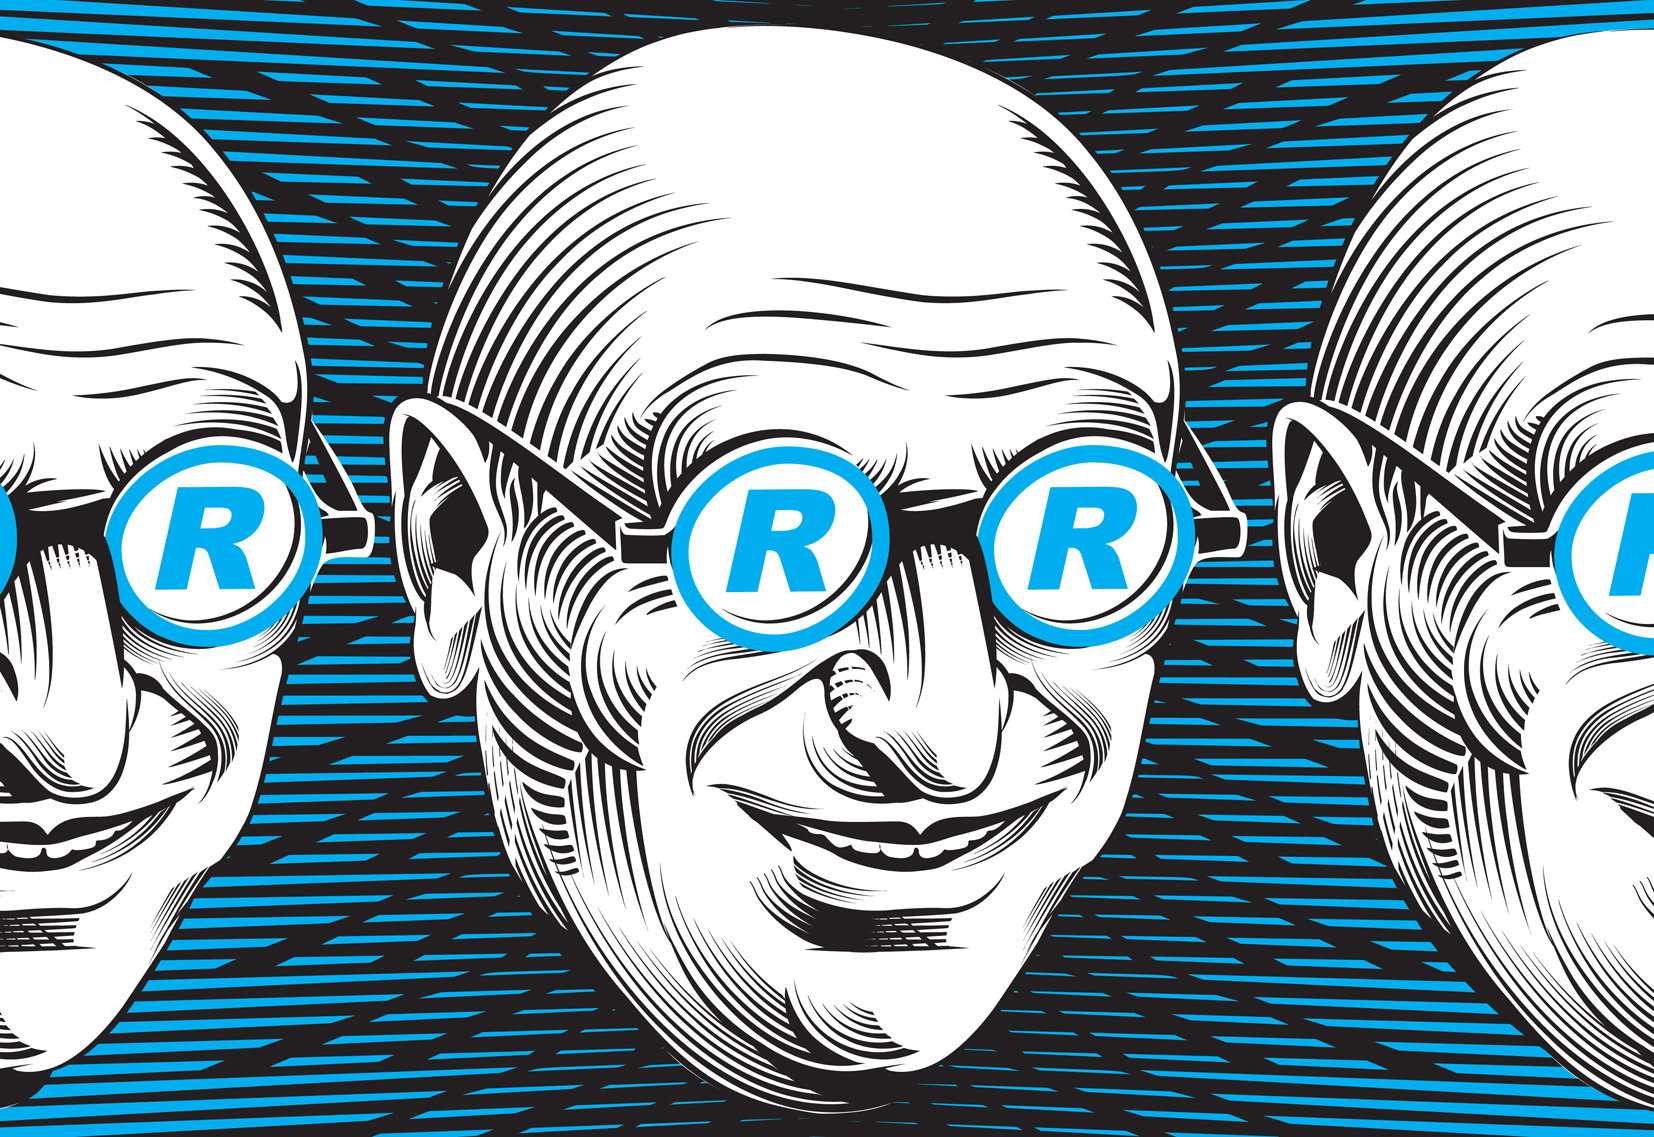 Wally Olins / Creative Review